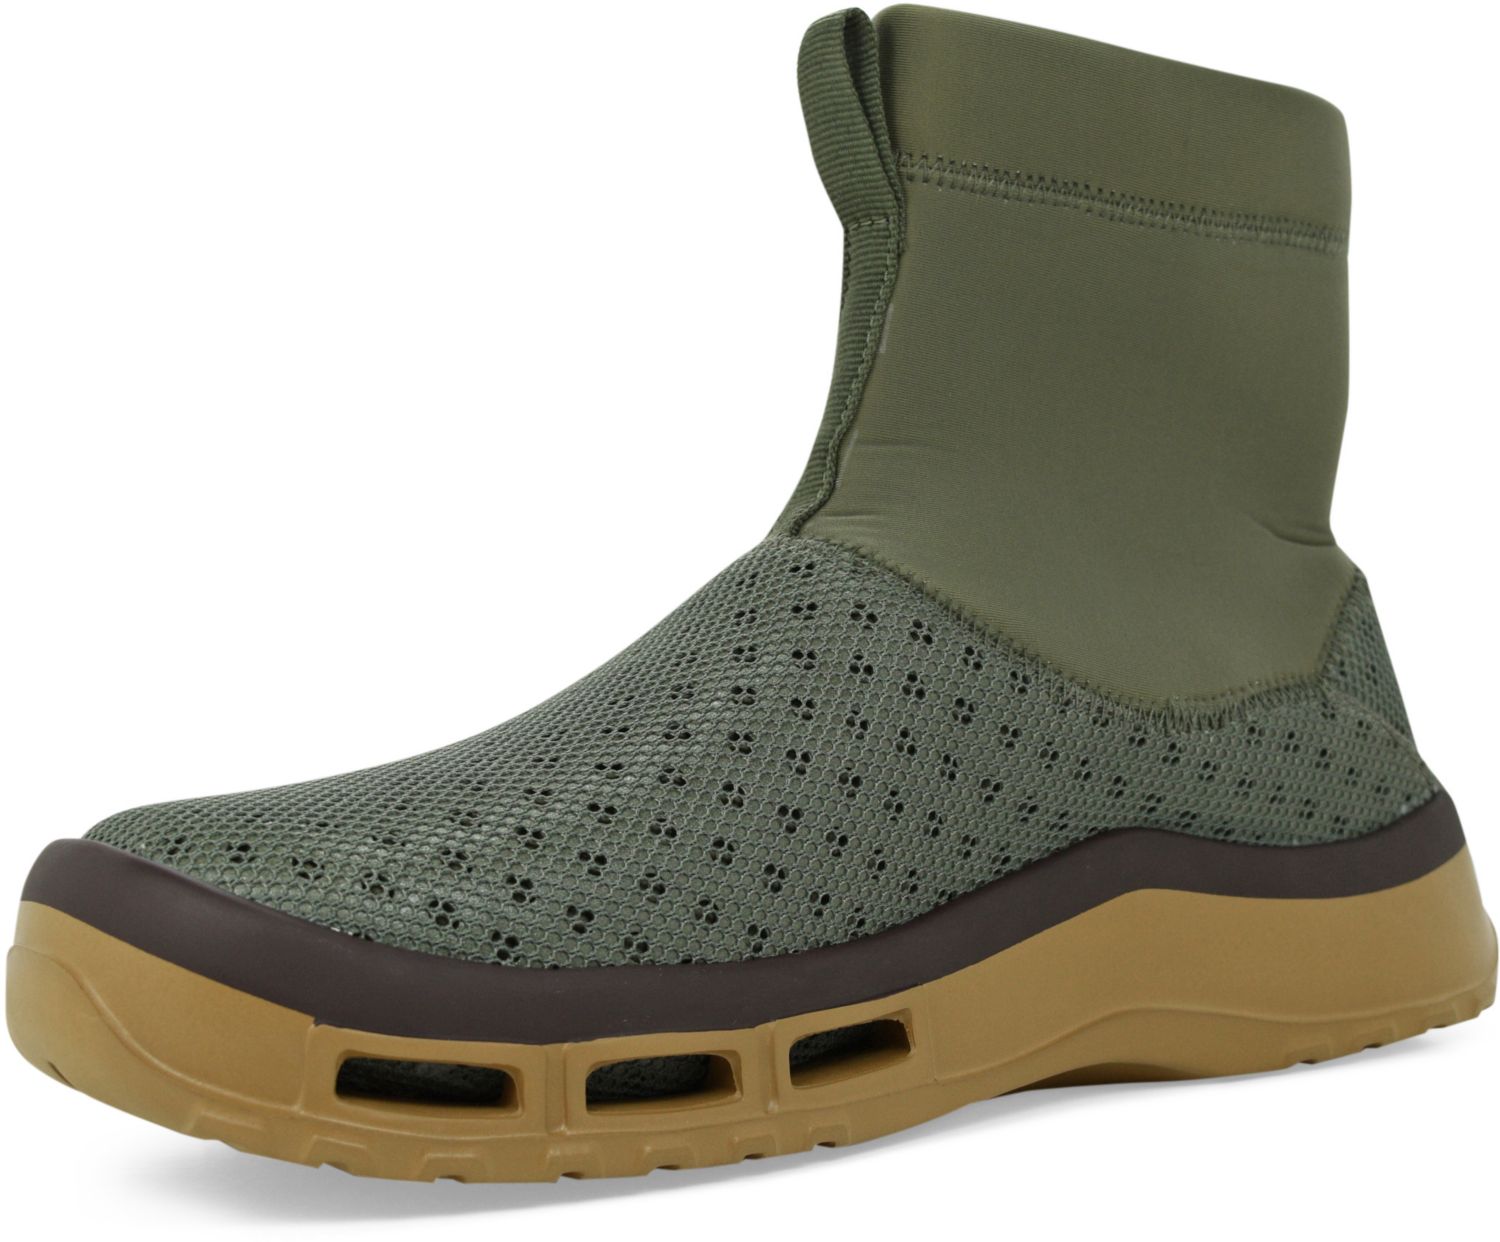 water boots for men